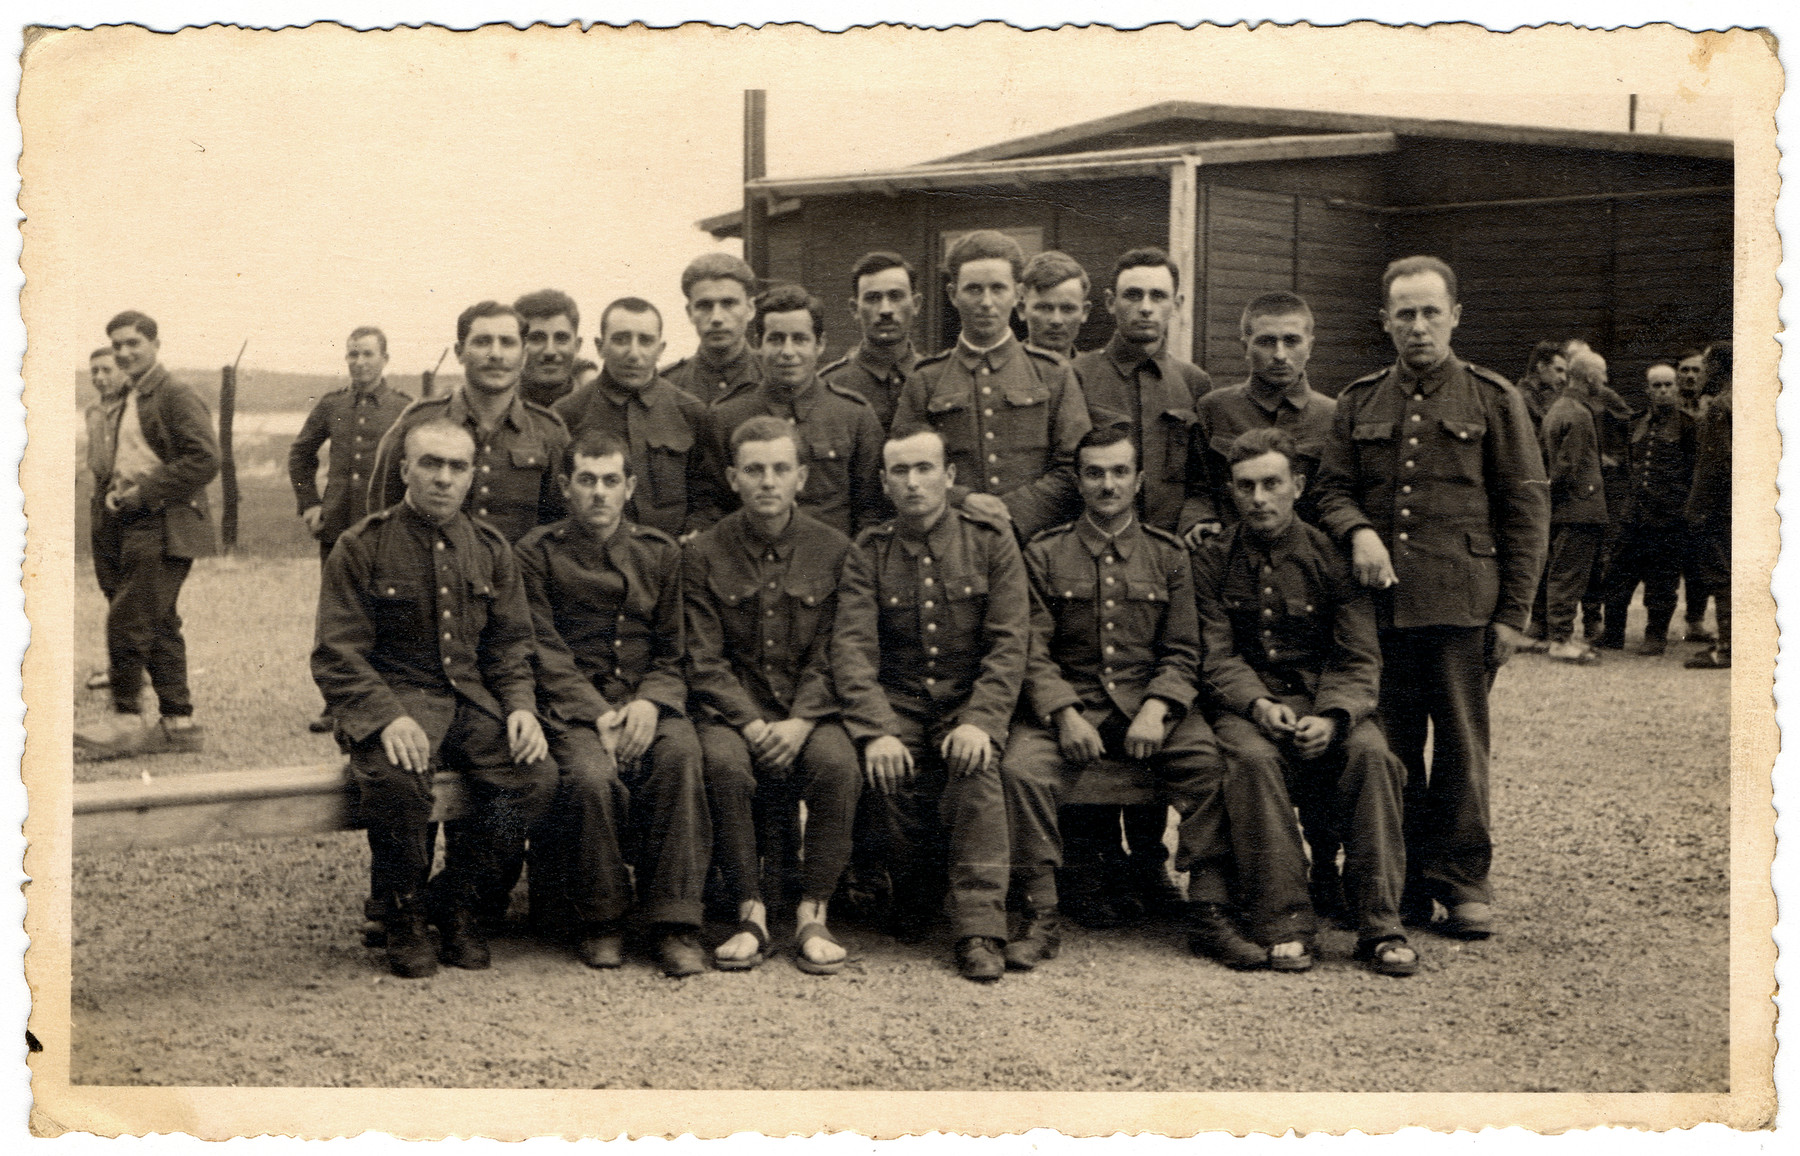 Group portrait of prisoners in the Elsterhorst prisoner of war camp, Stalag IV-A.

Jan Szelubski is pictured standing, fifth from the left.
Rio Francis is pictured sitting, first on right.